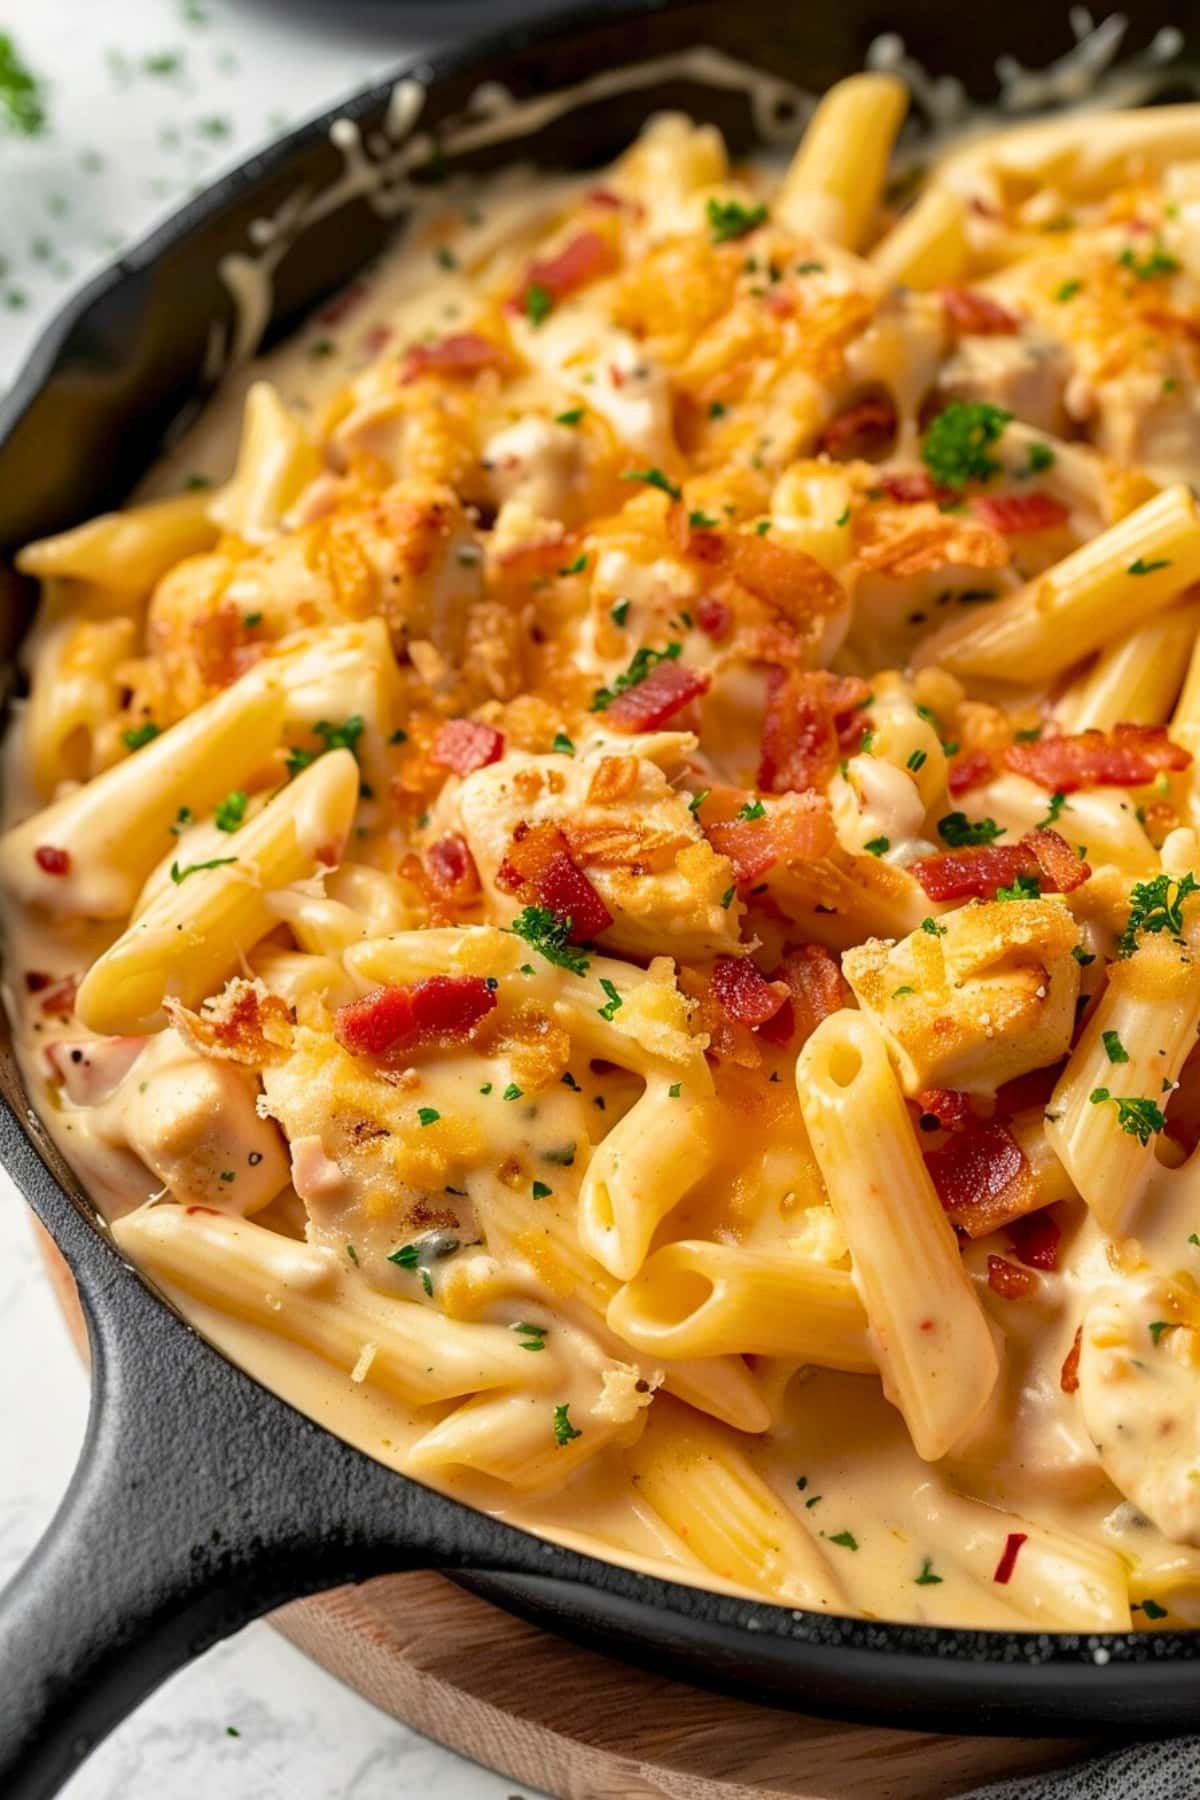 Penne pasta in cheesy and creamy sauce with chicken breast and fried bacon in a cast iron skillet.